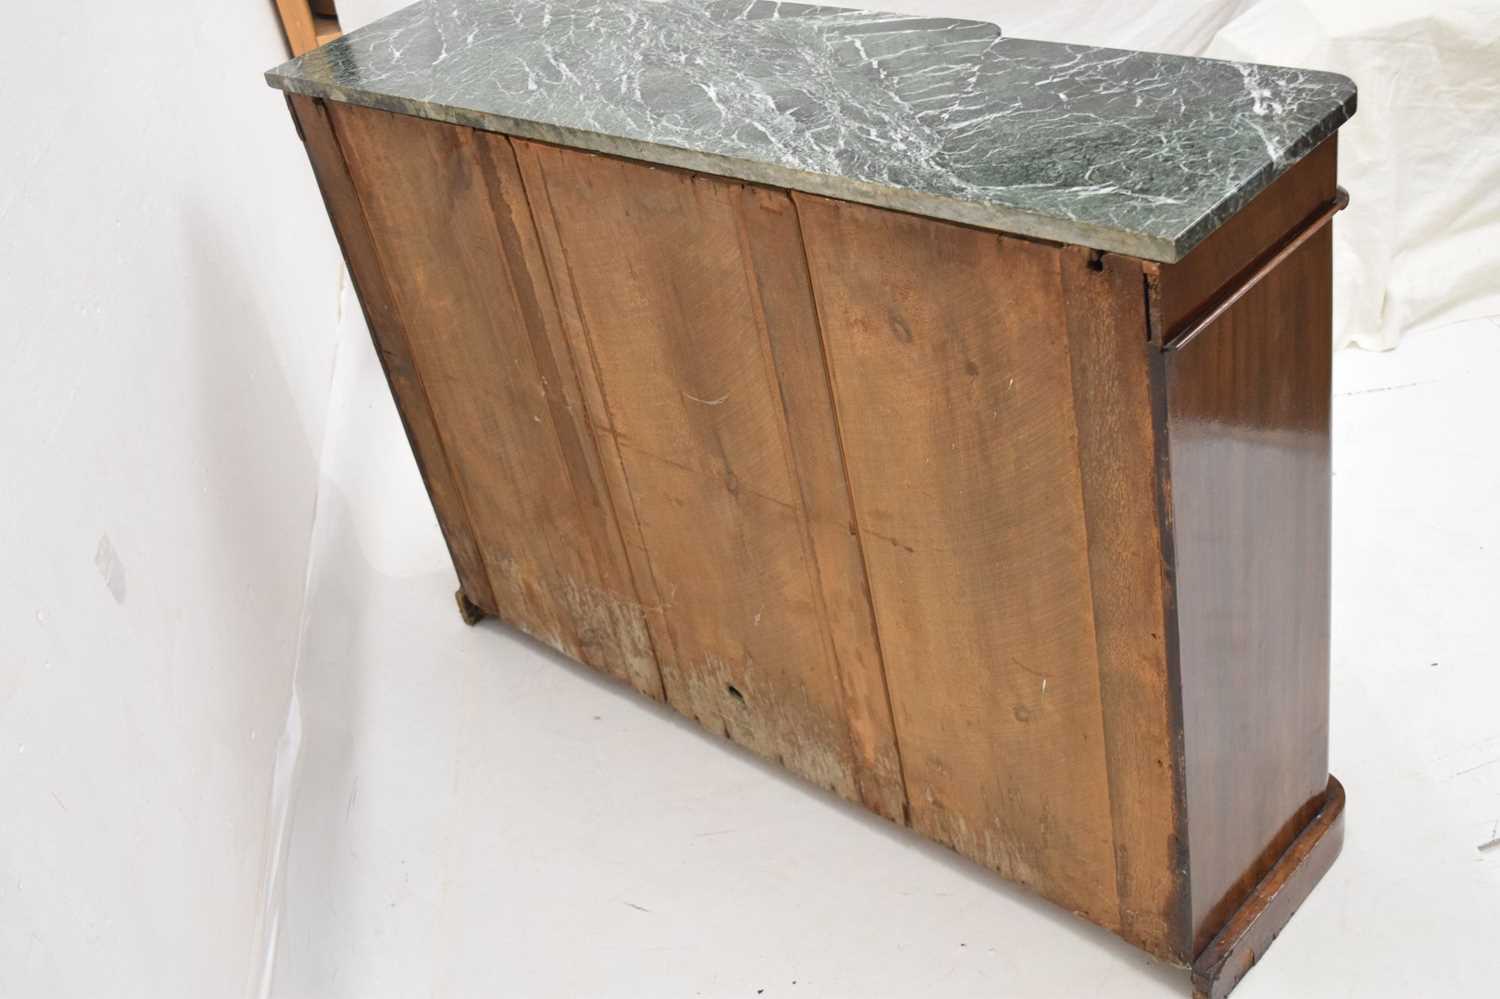 19th century inlaid walnut breakfront credenza or side cabinet with marble top - Image 11 of 13